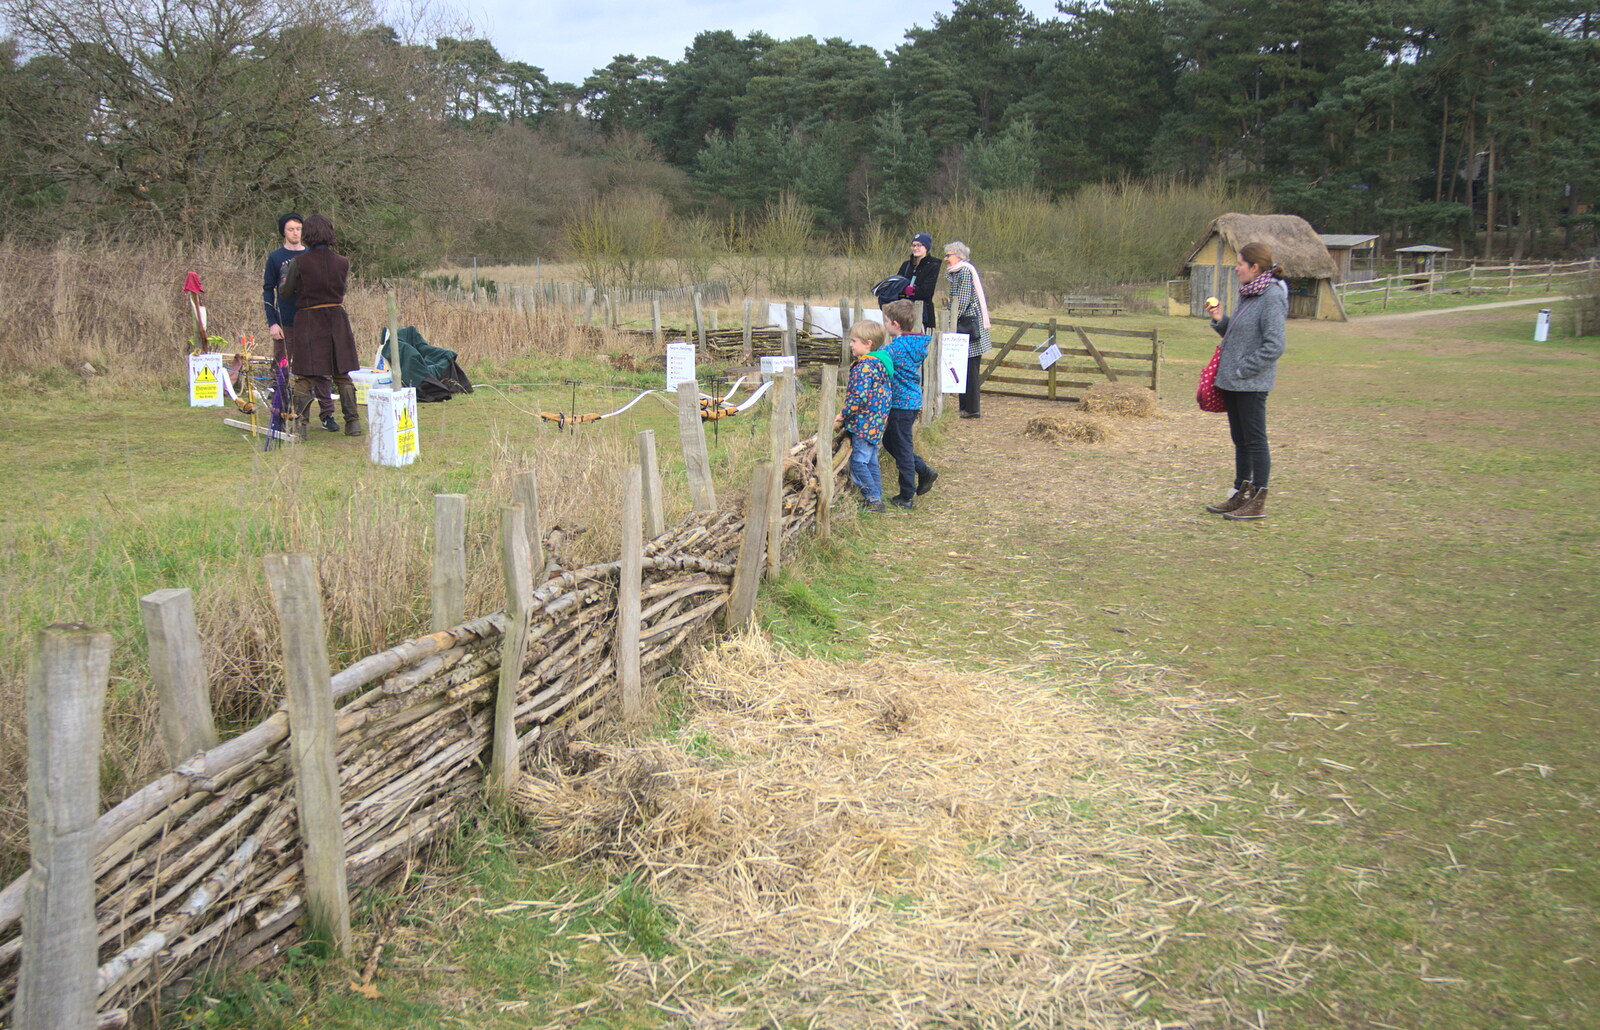 Outside, we watch an archery lesson from An Anglo-Saxon Village, West Stow, Suffolk - 19th February 2017